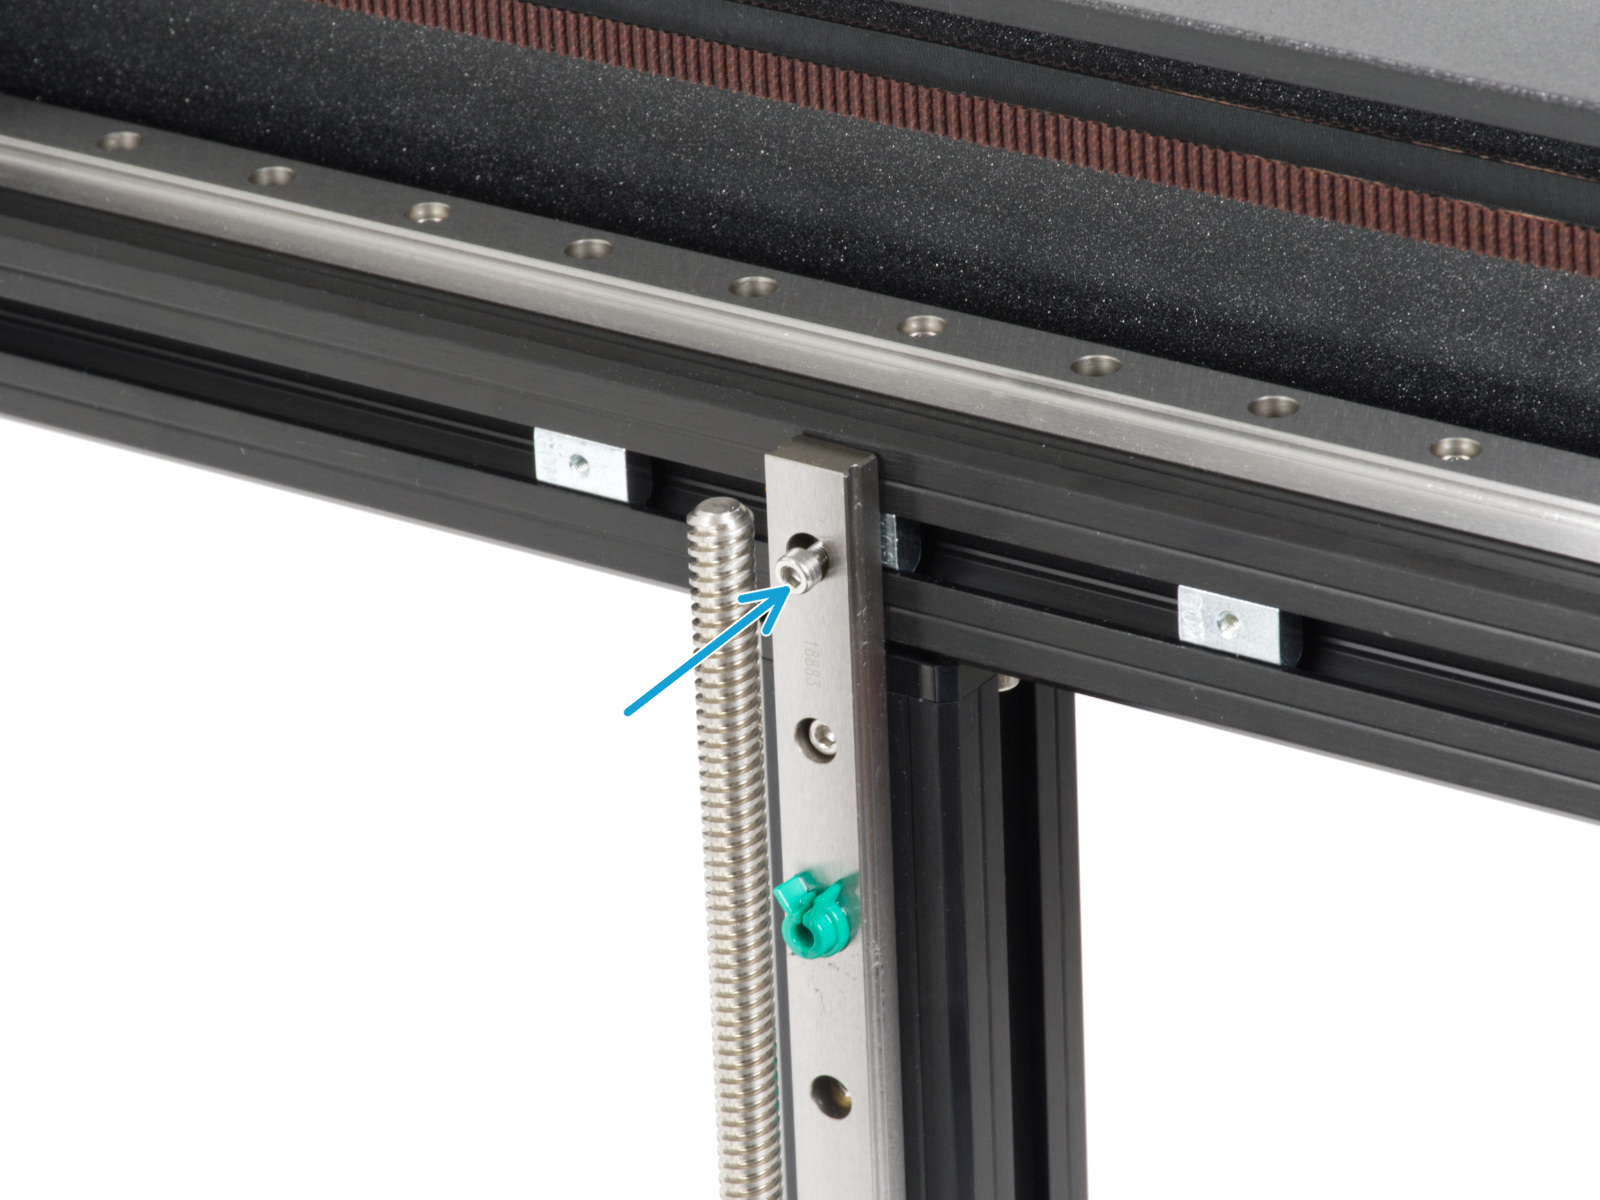 Securing the right linear rail